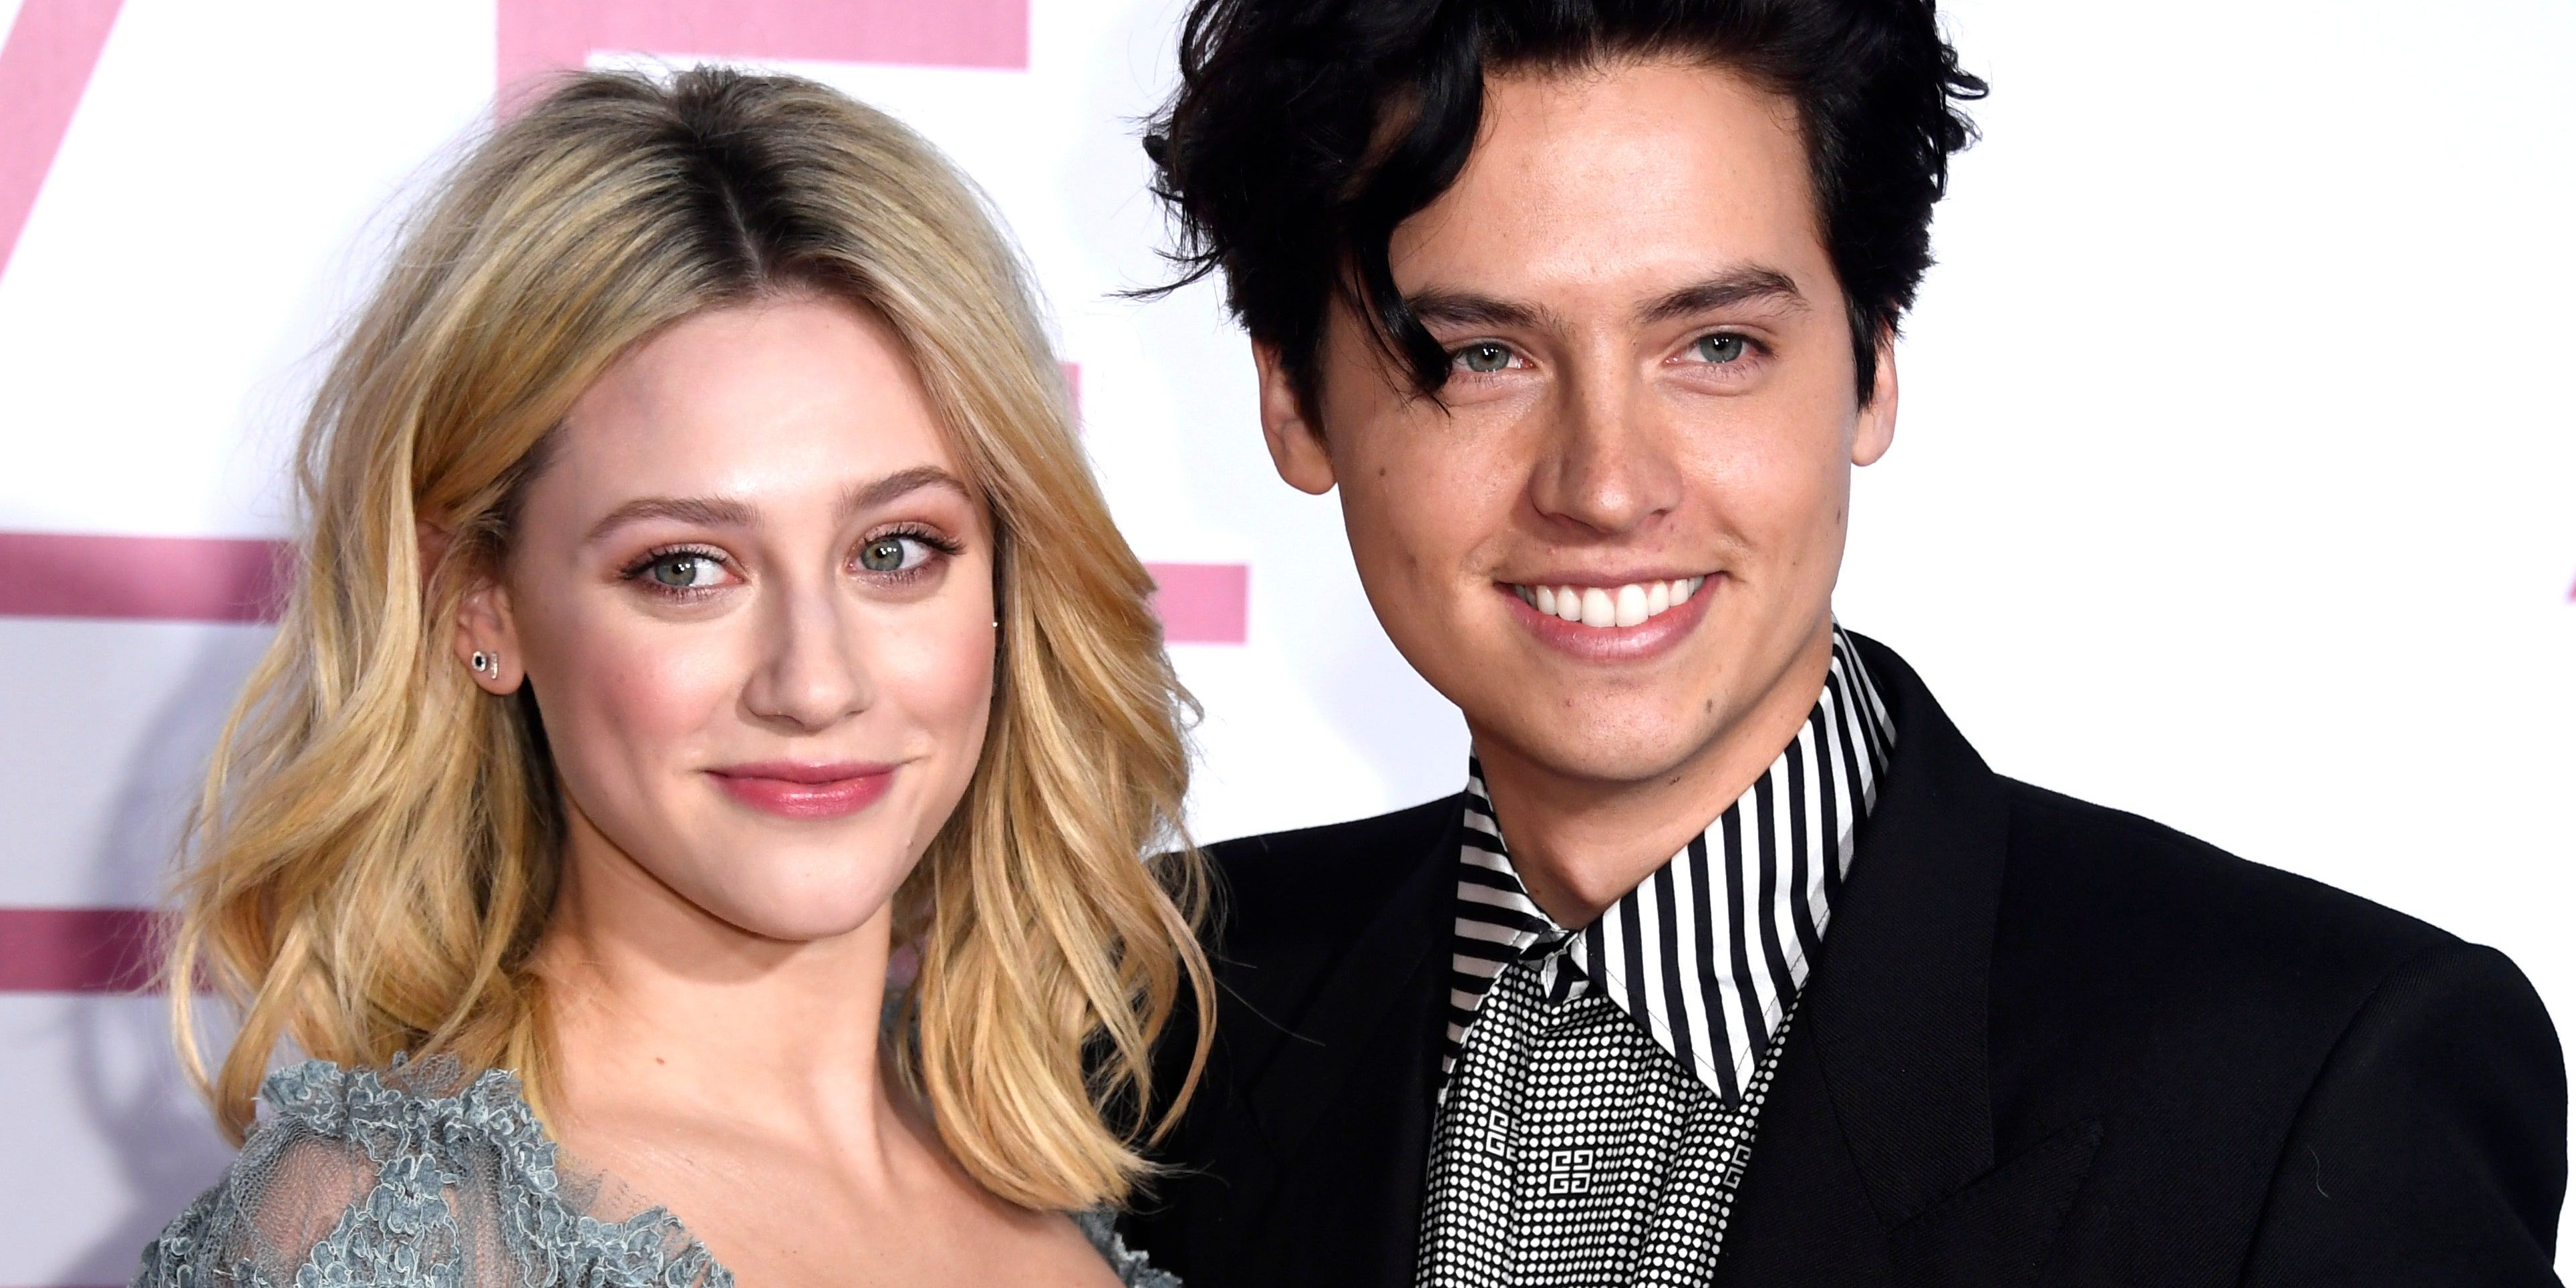 Lili Reinhart and Cole Sprouse's Relationship: A Complete Timeline